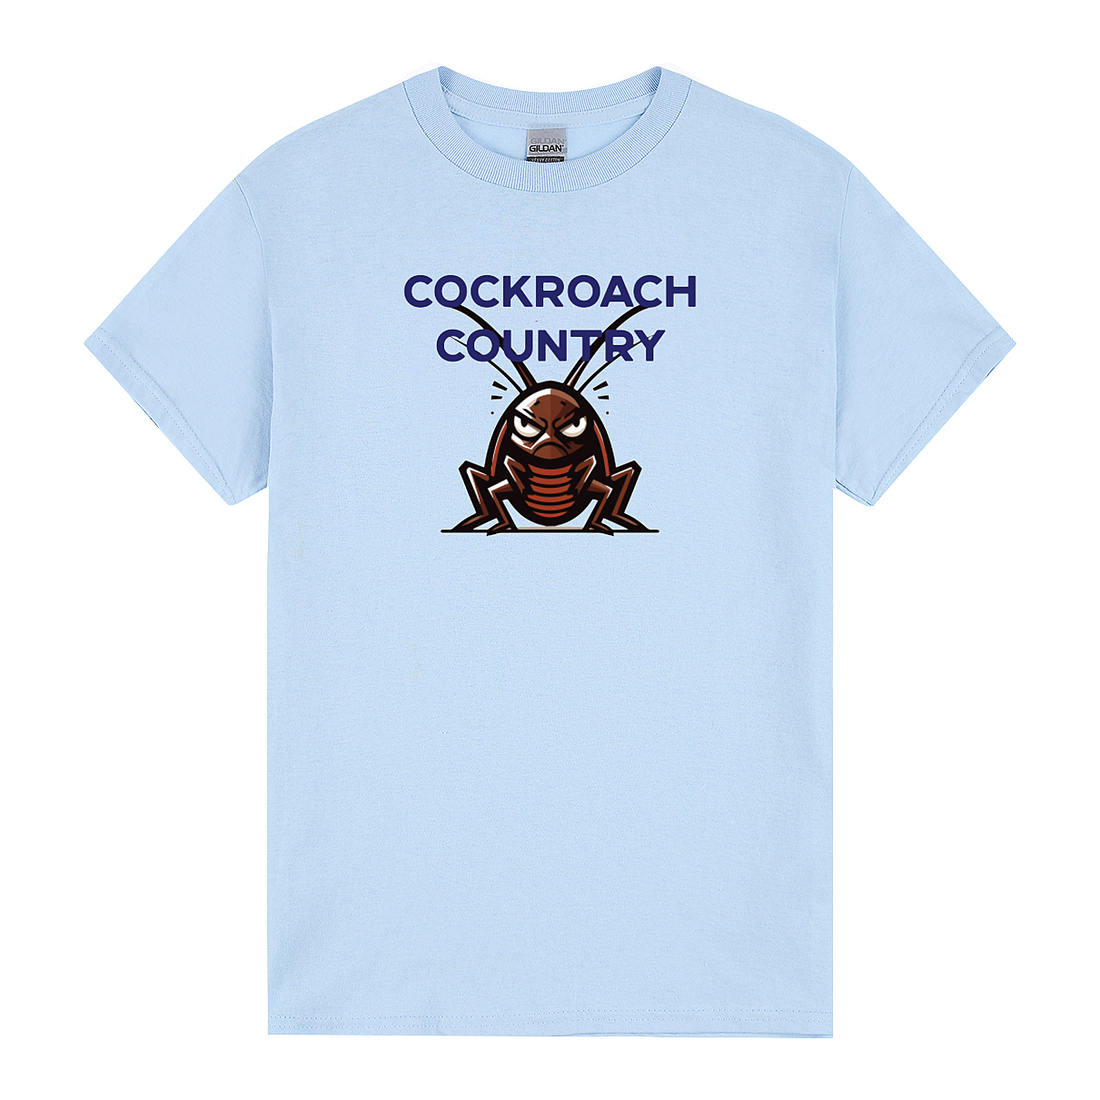 Cockroach Country Tee